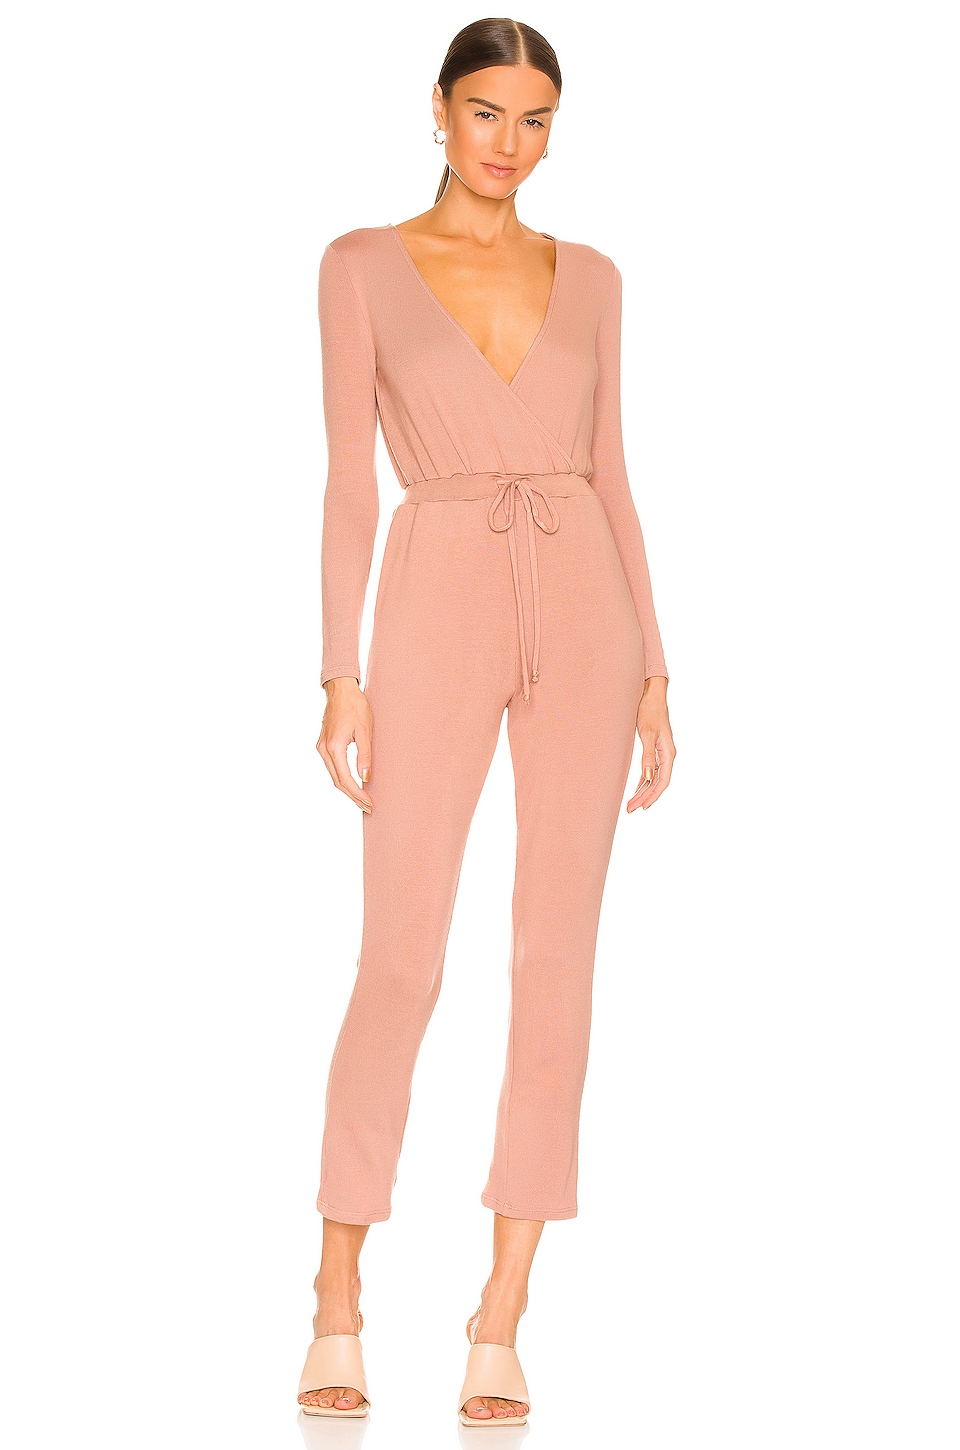 Lovers and Friends Frankie Jumpsuit in Latte Brown | REVOLVE